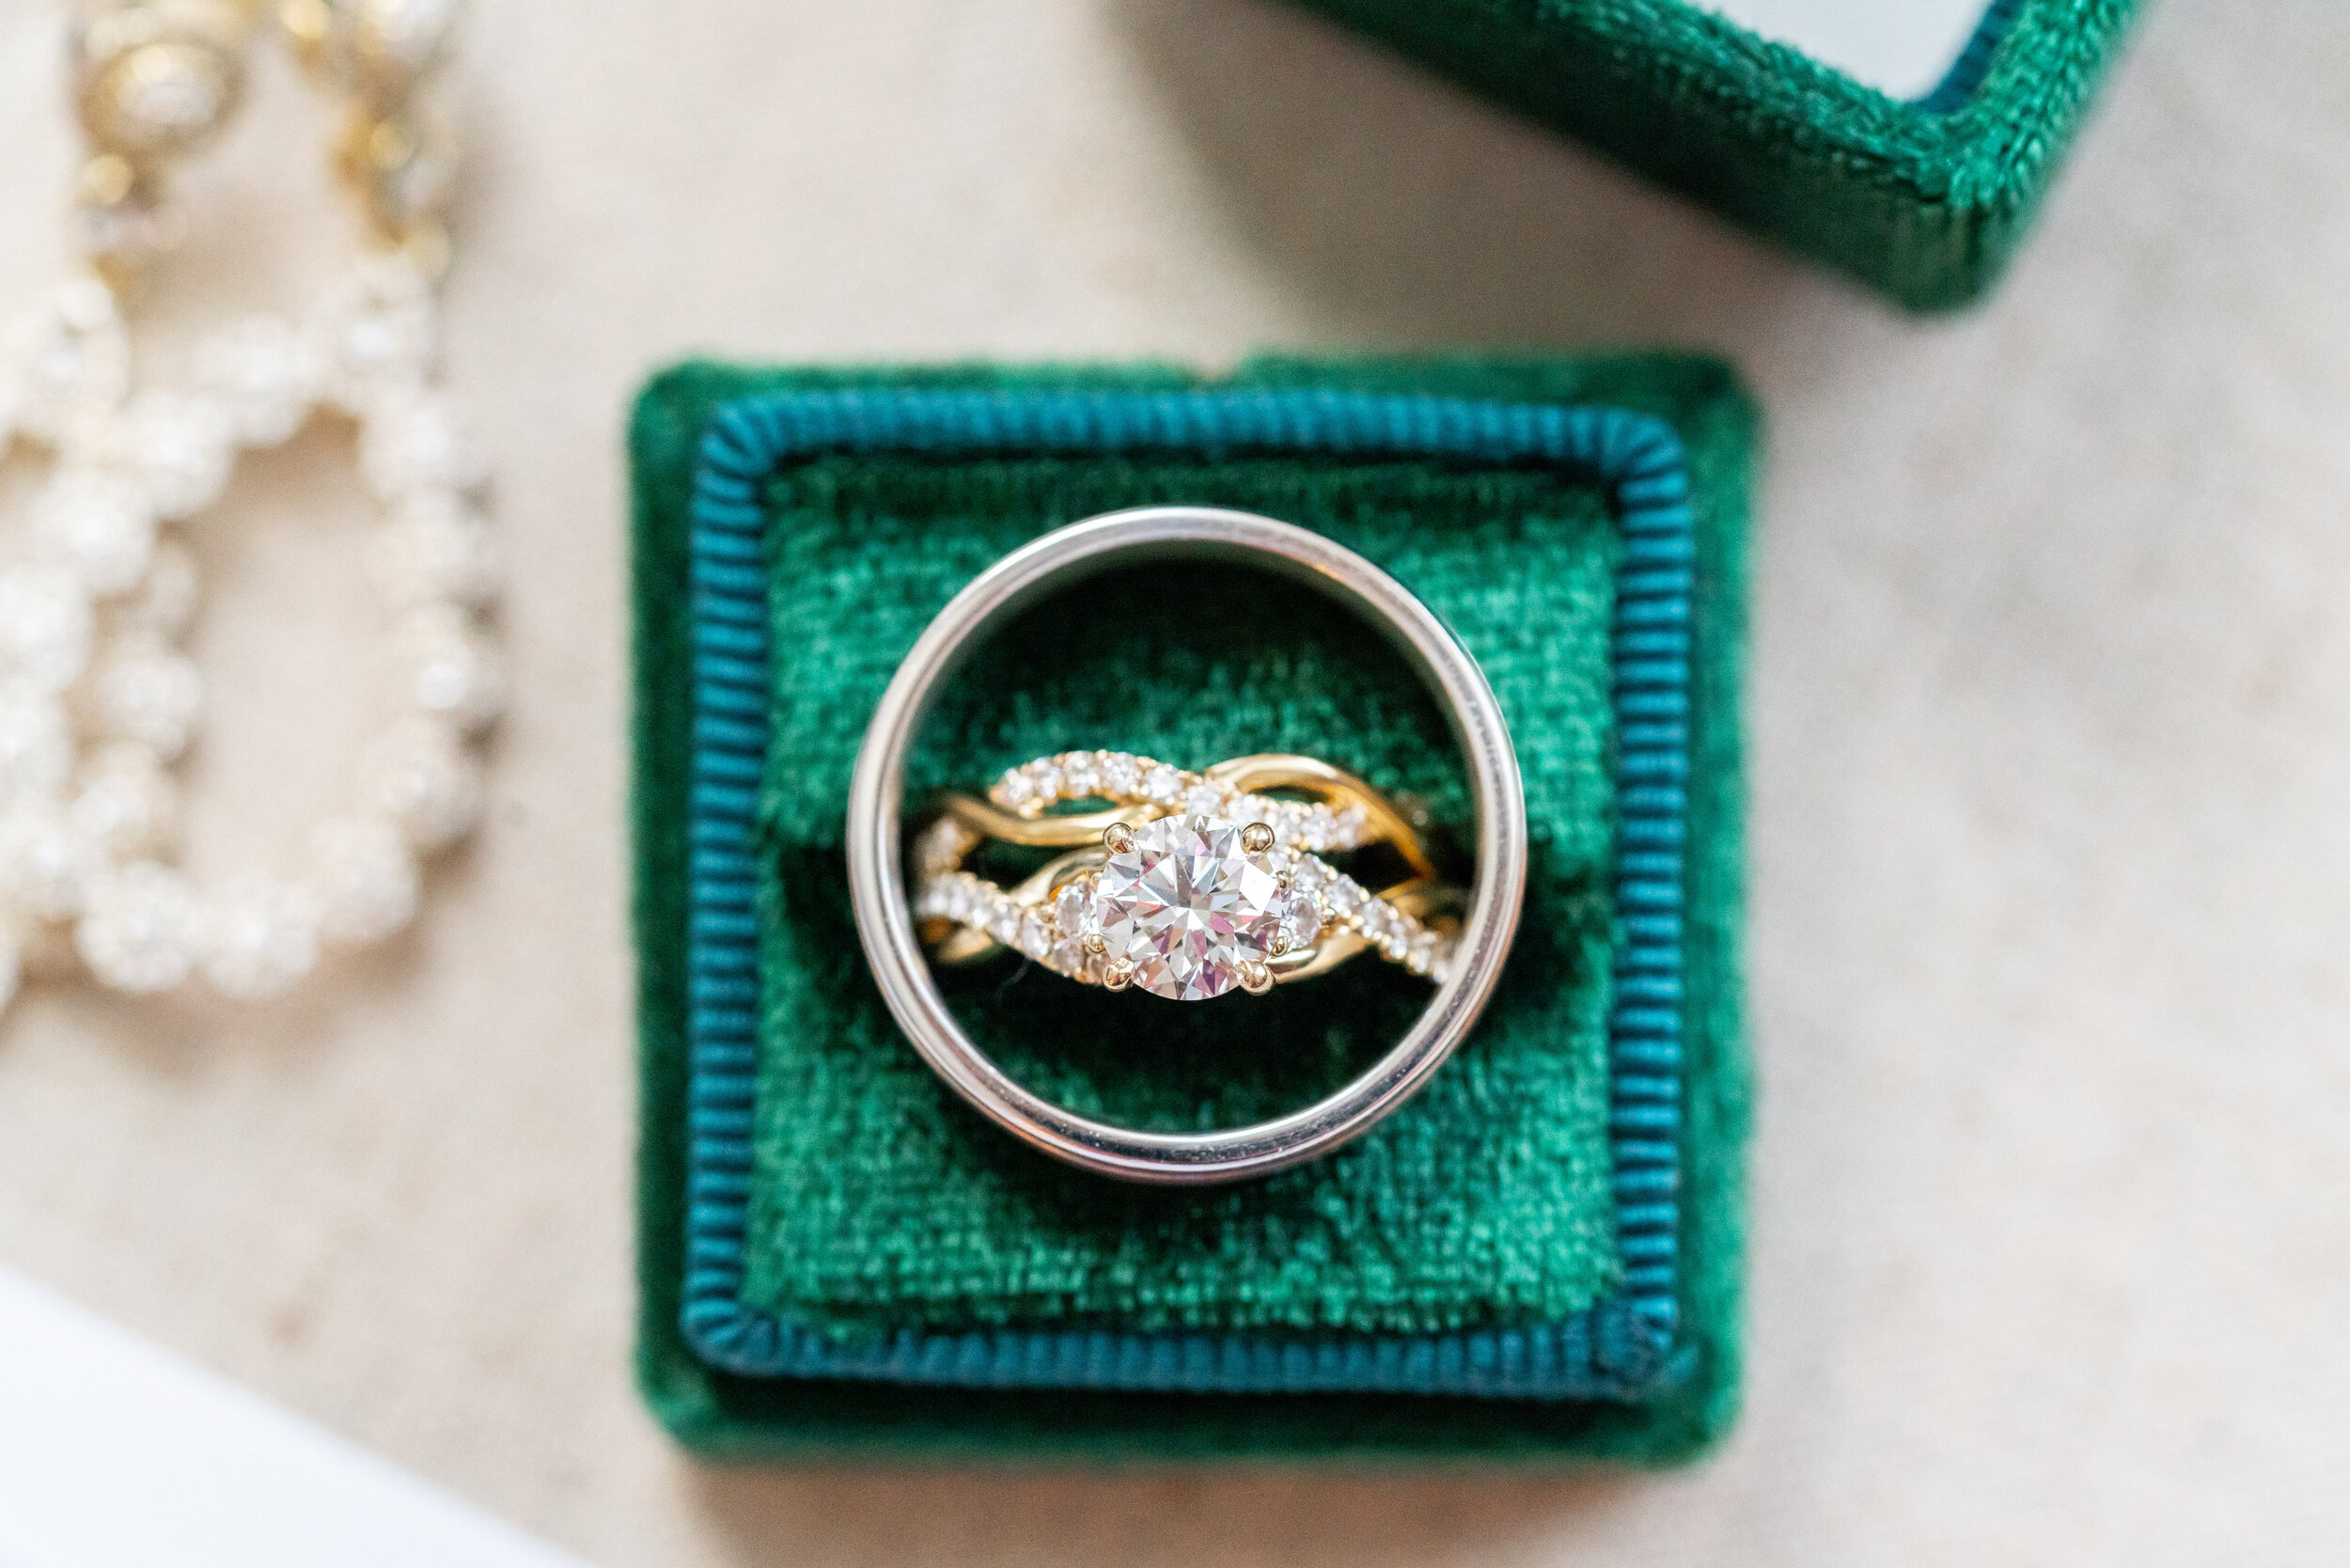 wedding bands and ring in emerald green mrs ring box